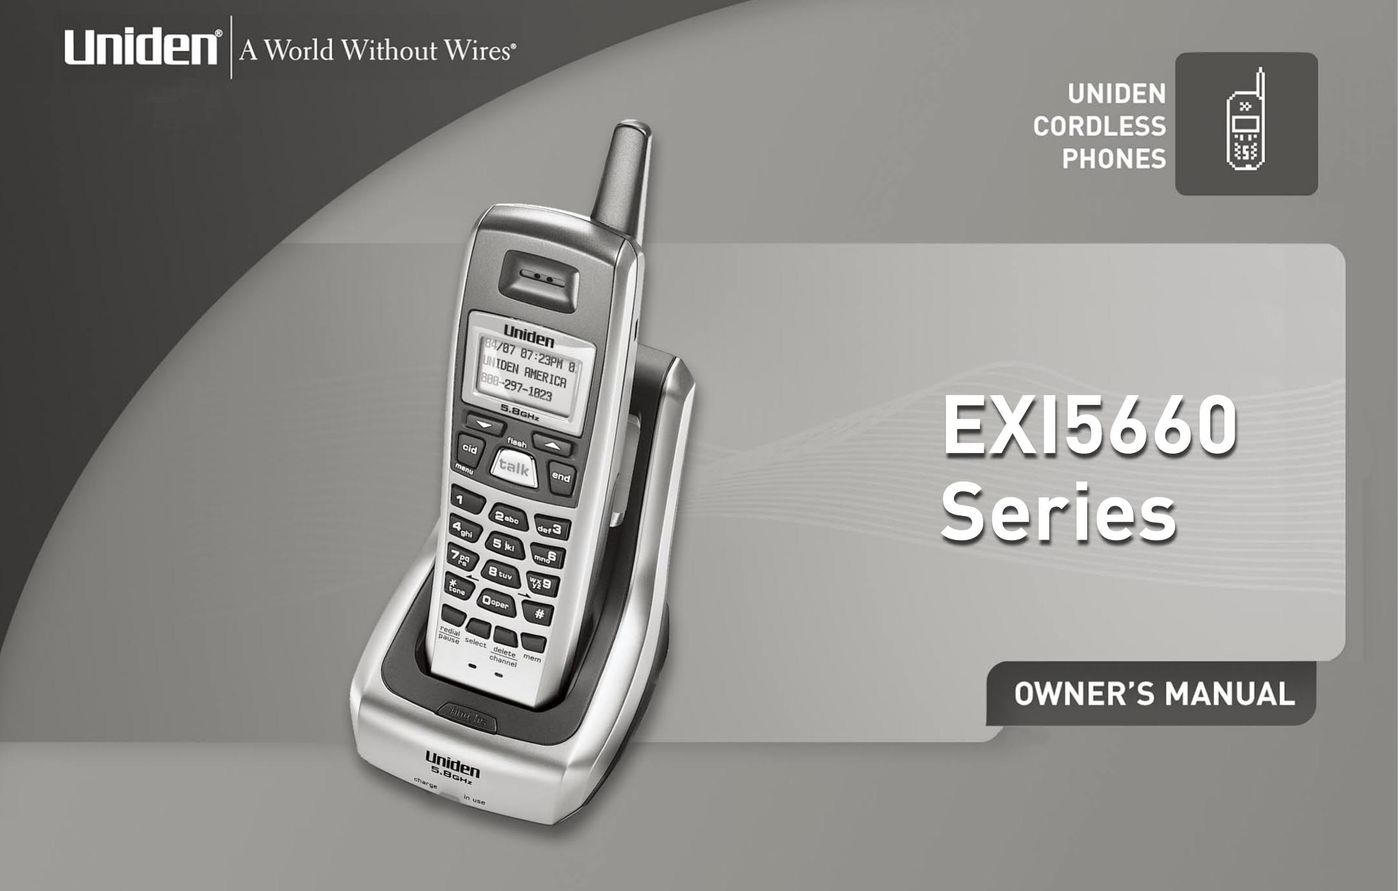 Uniden EXI5660 Series Cell Phone User Manual